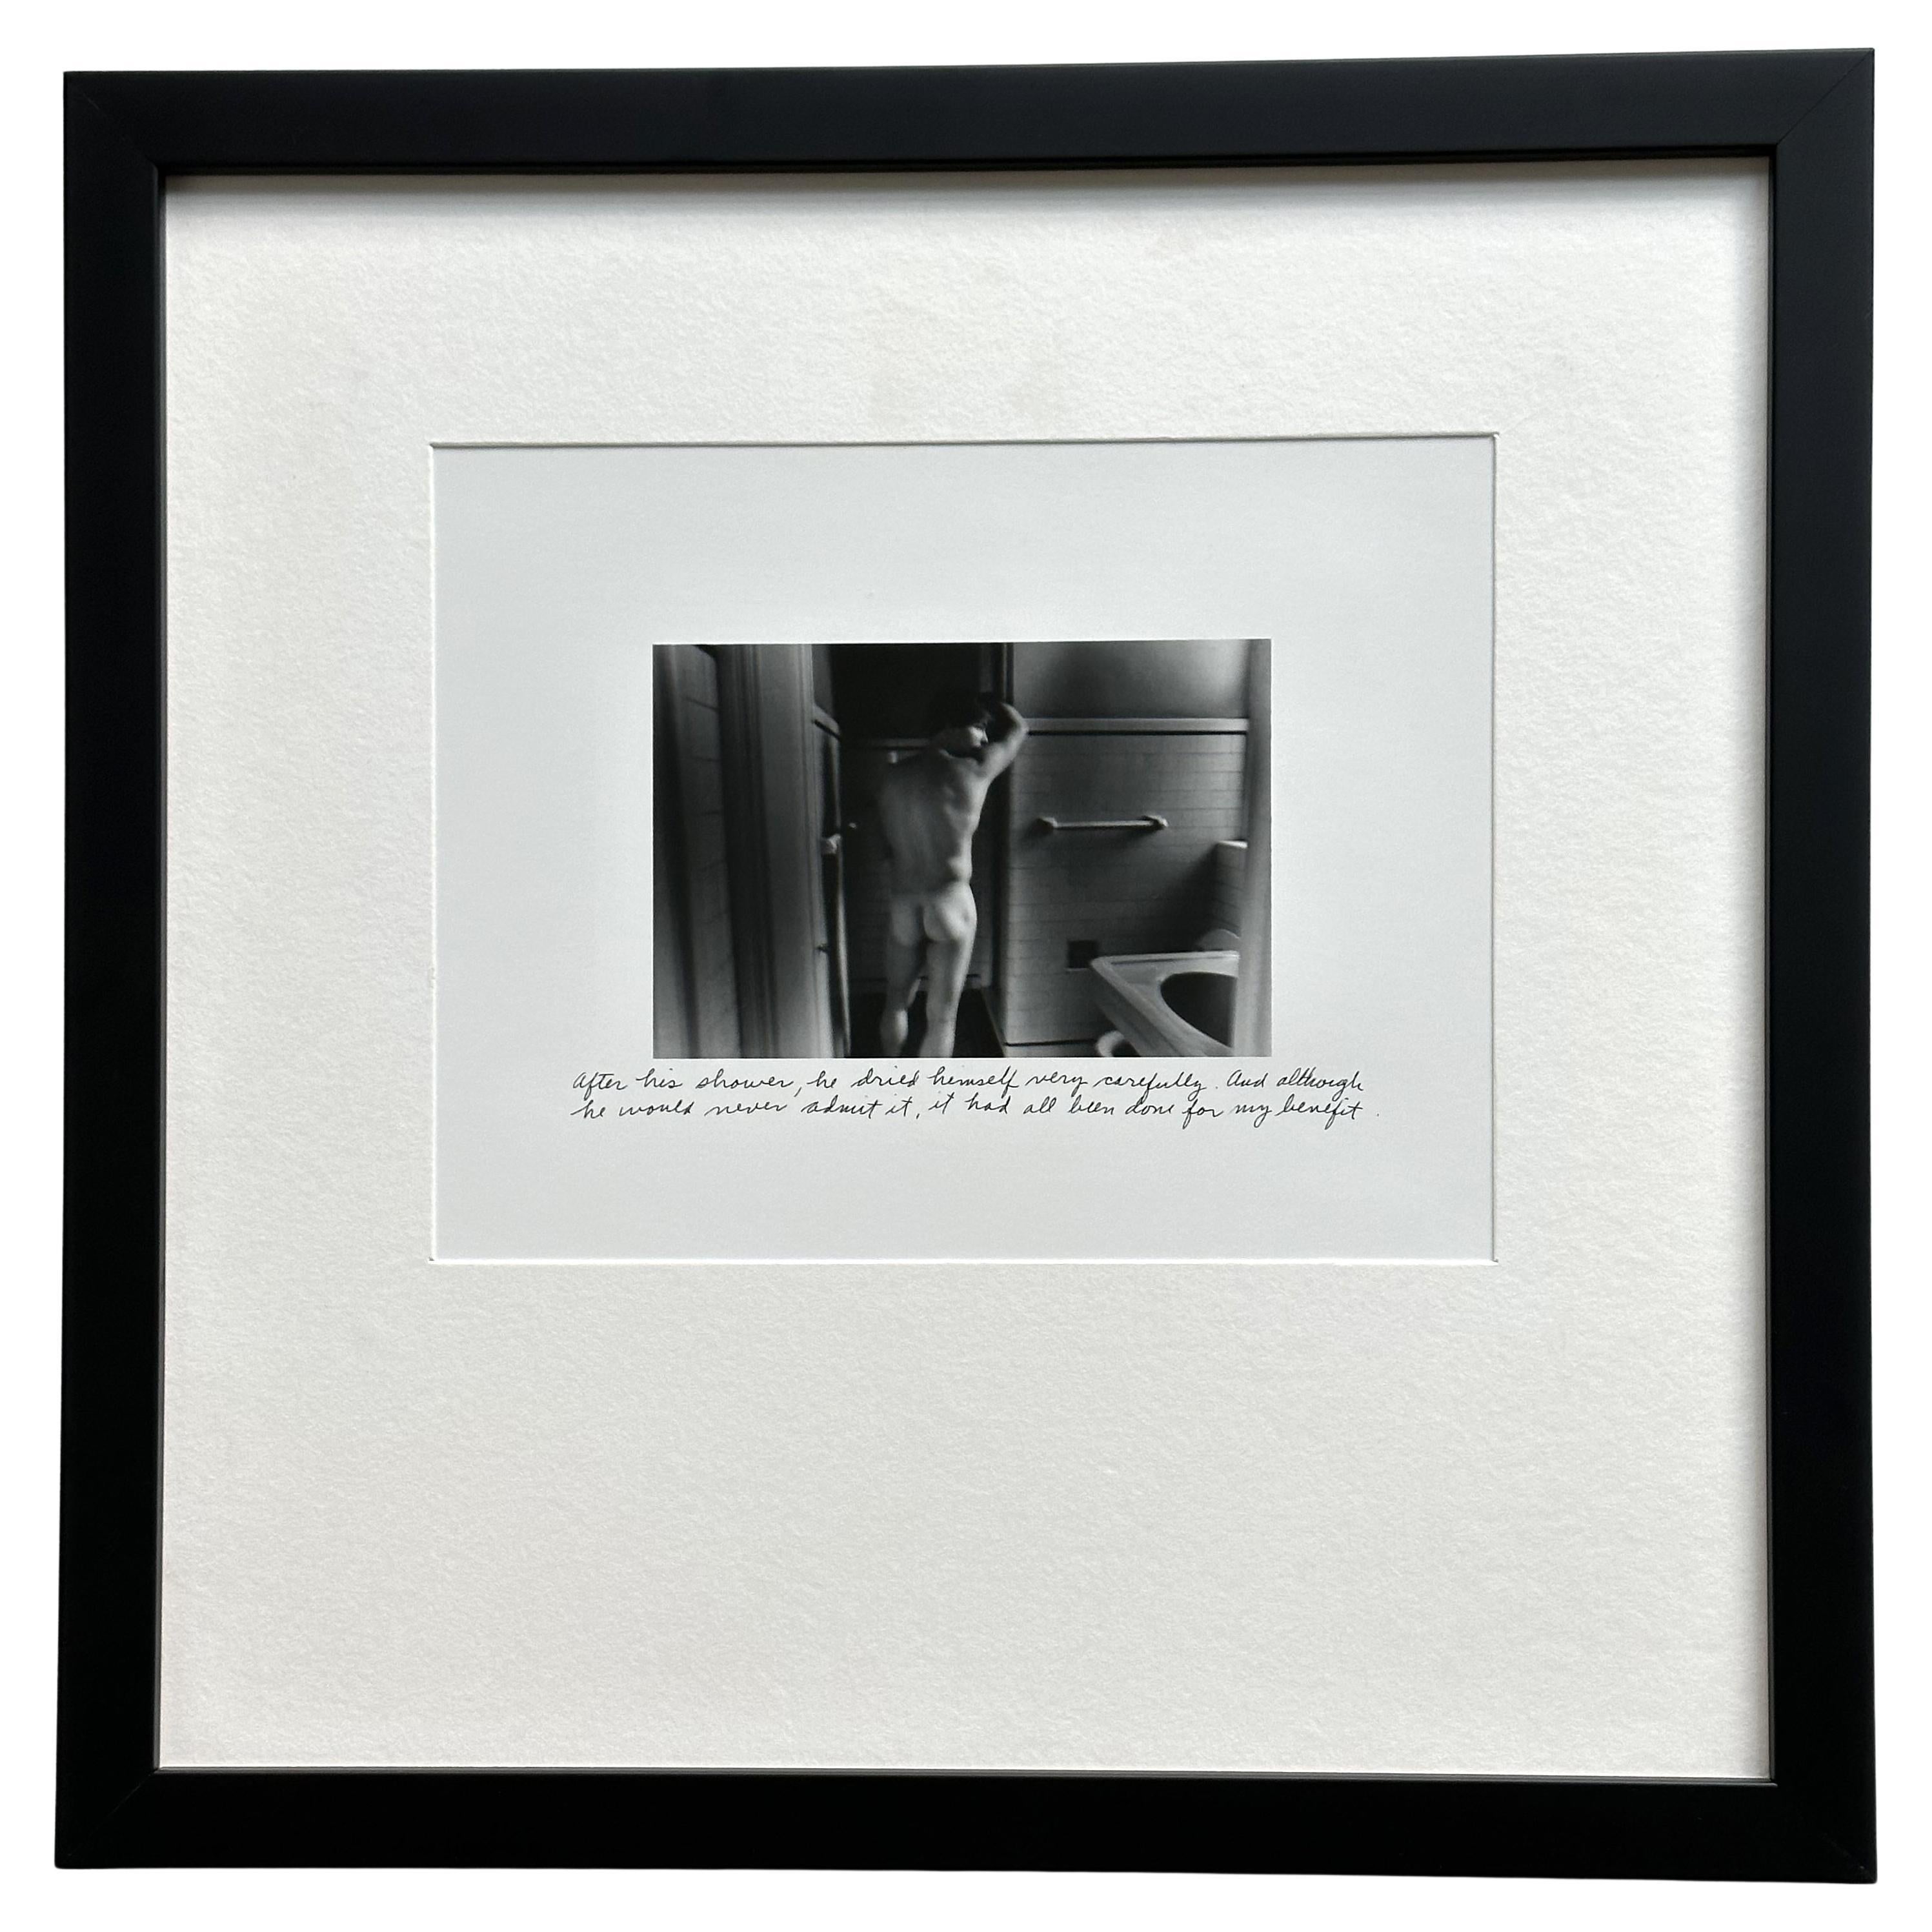 Framed Editioned Photograph Homage to Cavafy Series by Duane Michals For Sale